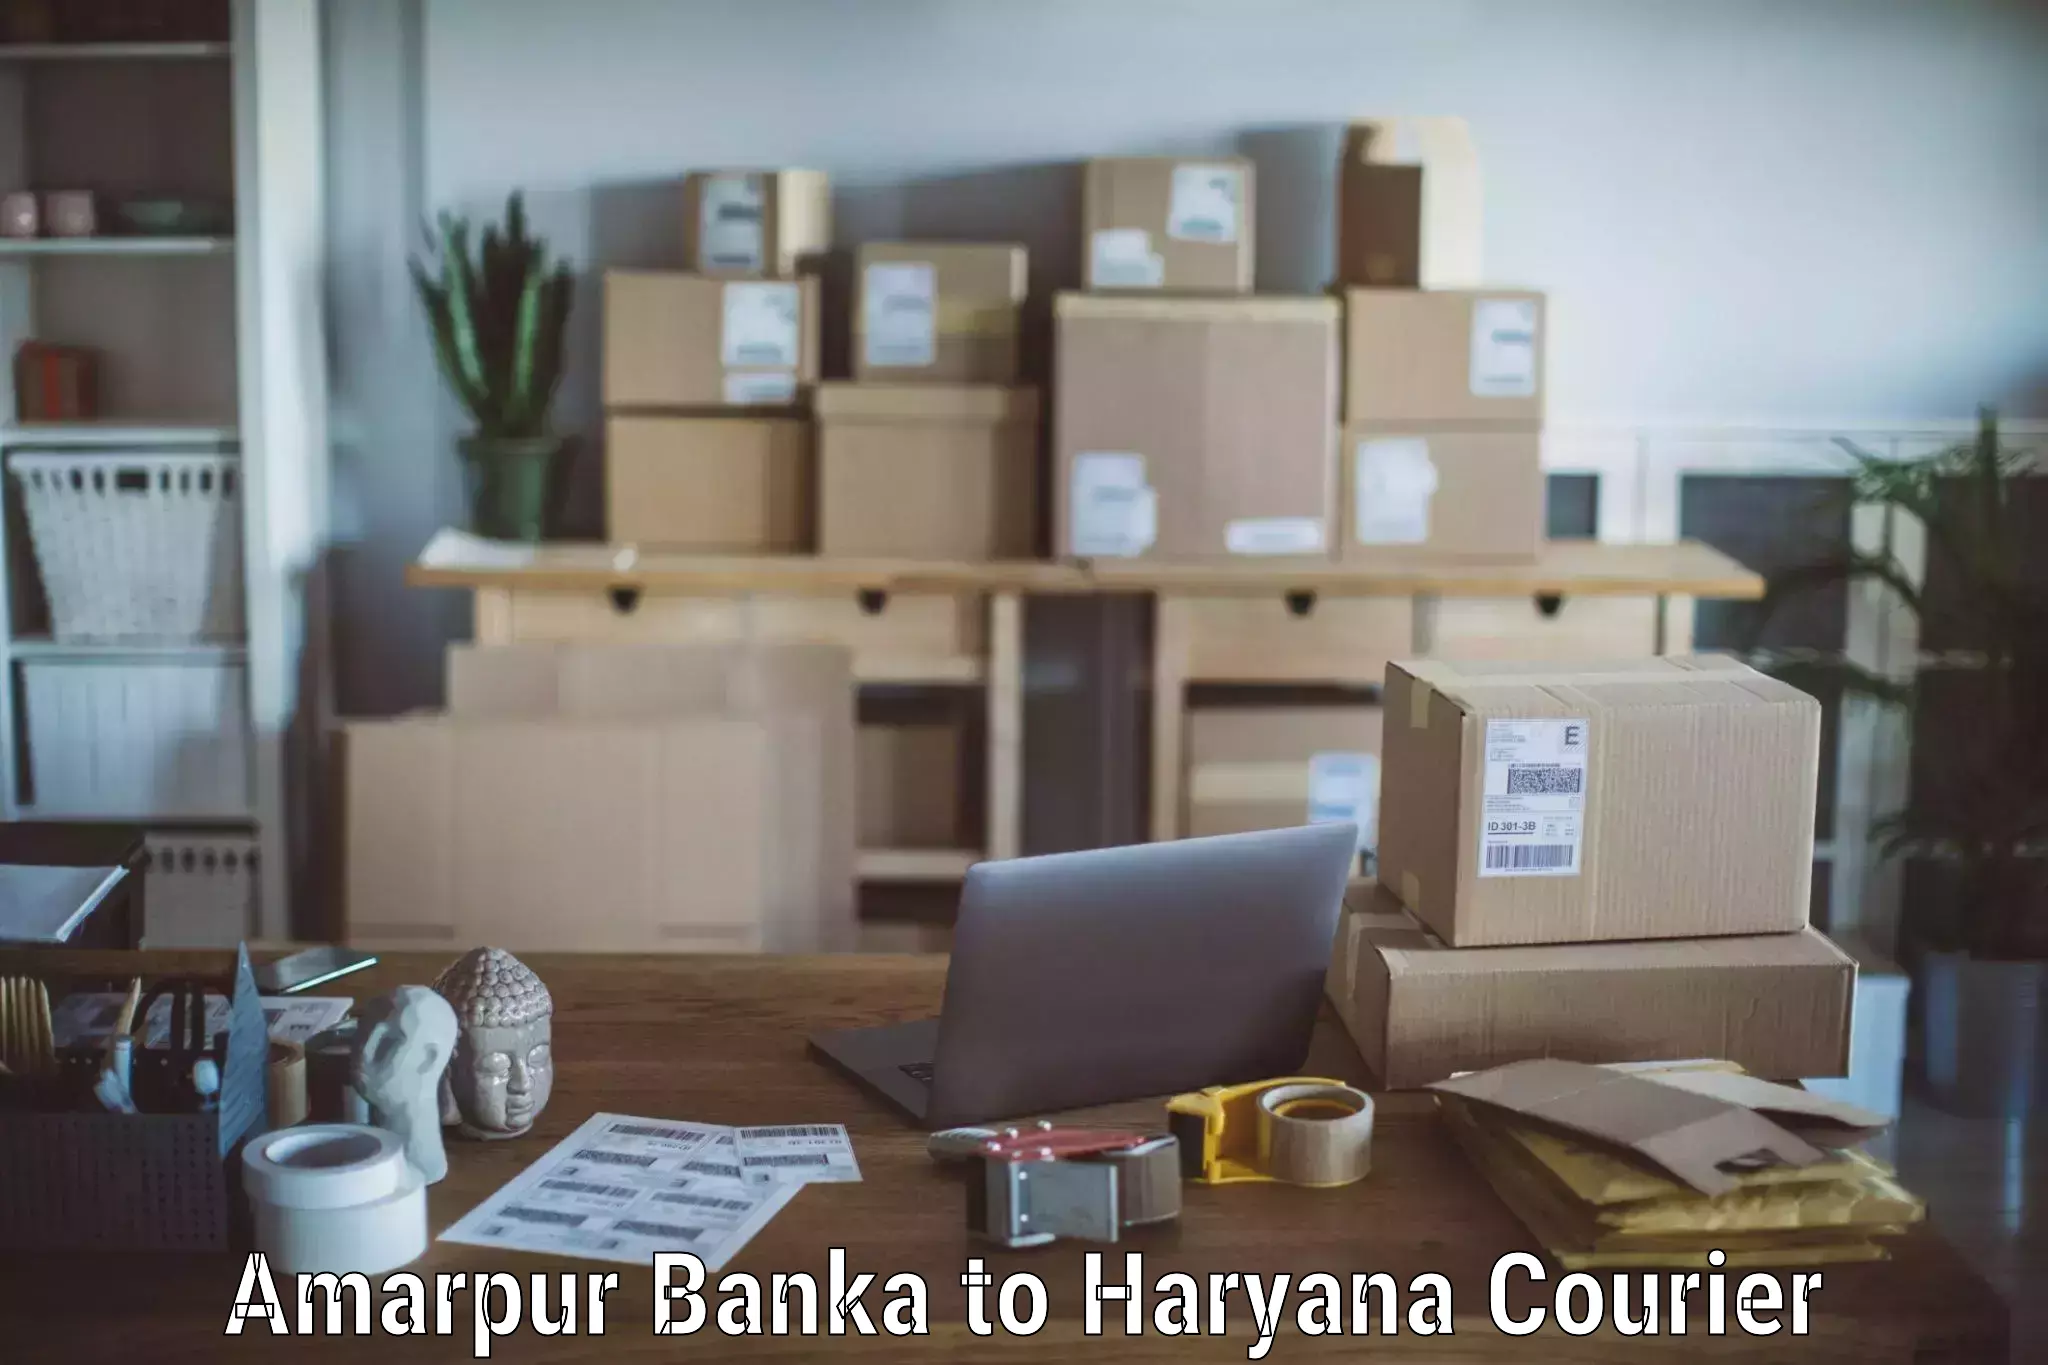 Quality relocation assistance in Amarpur Banka to Pinjore